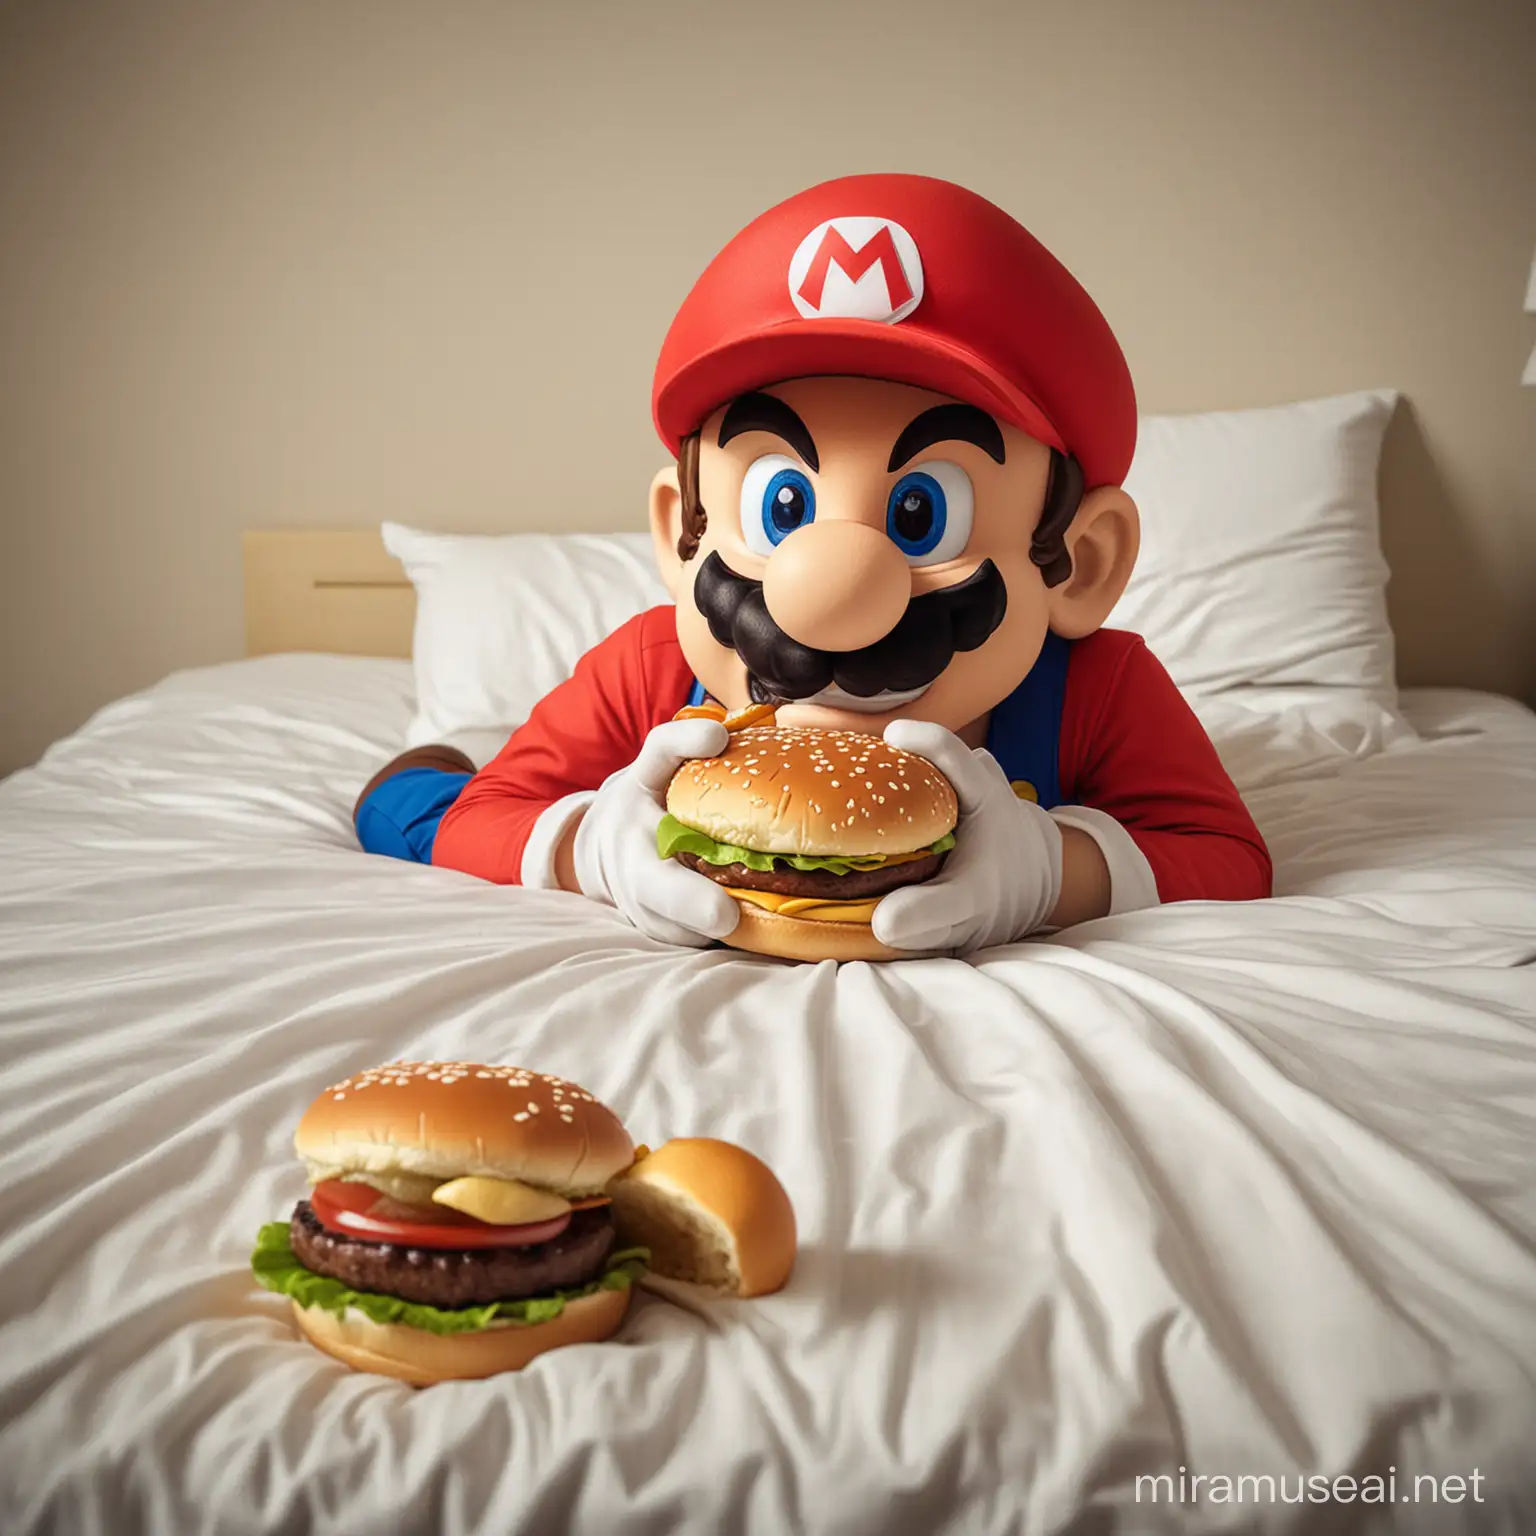 Super Mario Eating a Hamburger and Relaxing on a Bed